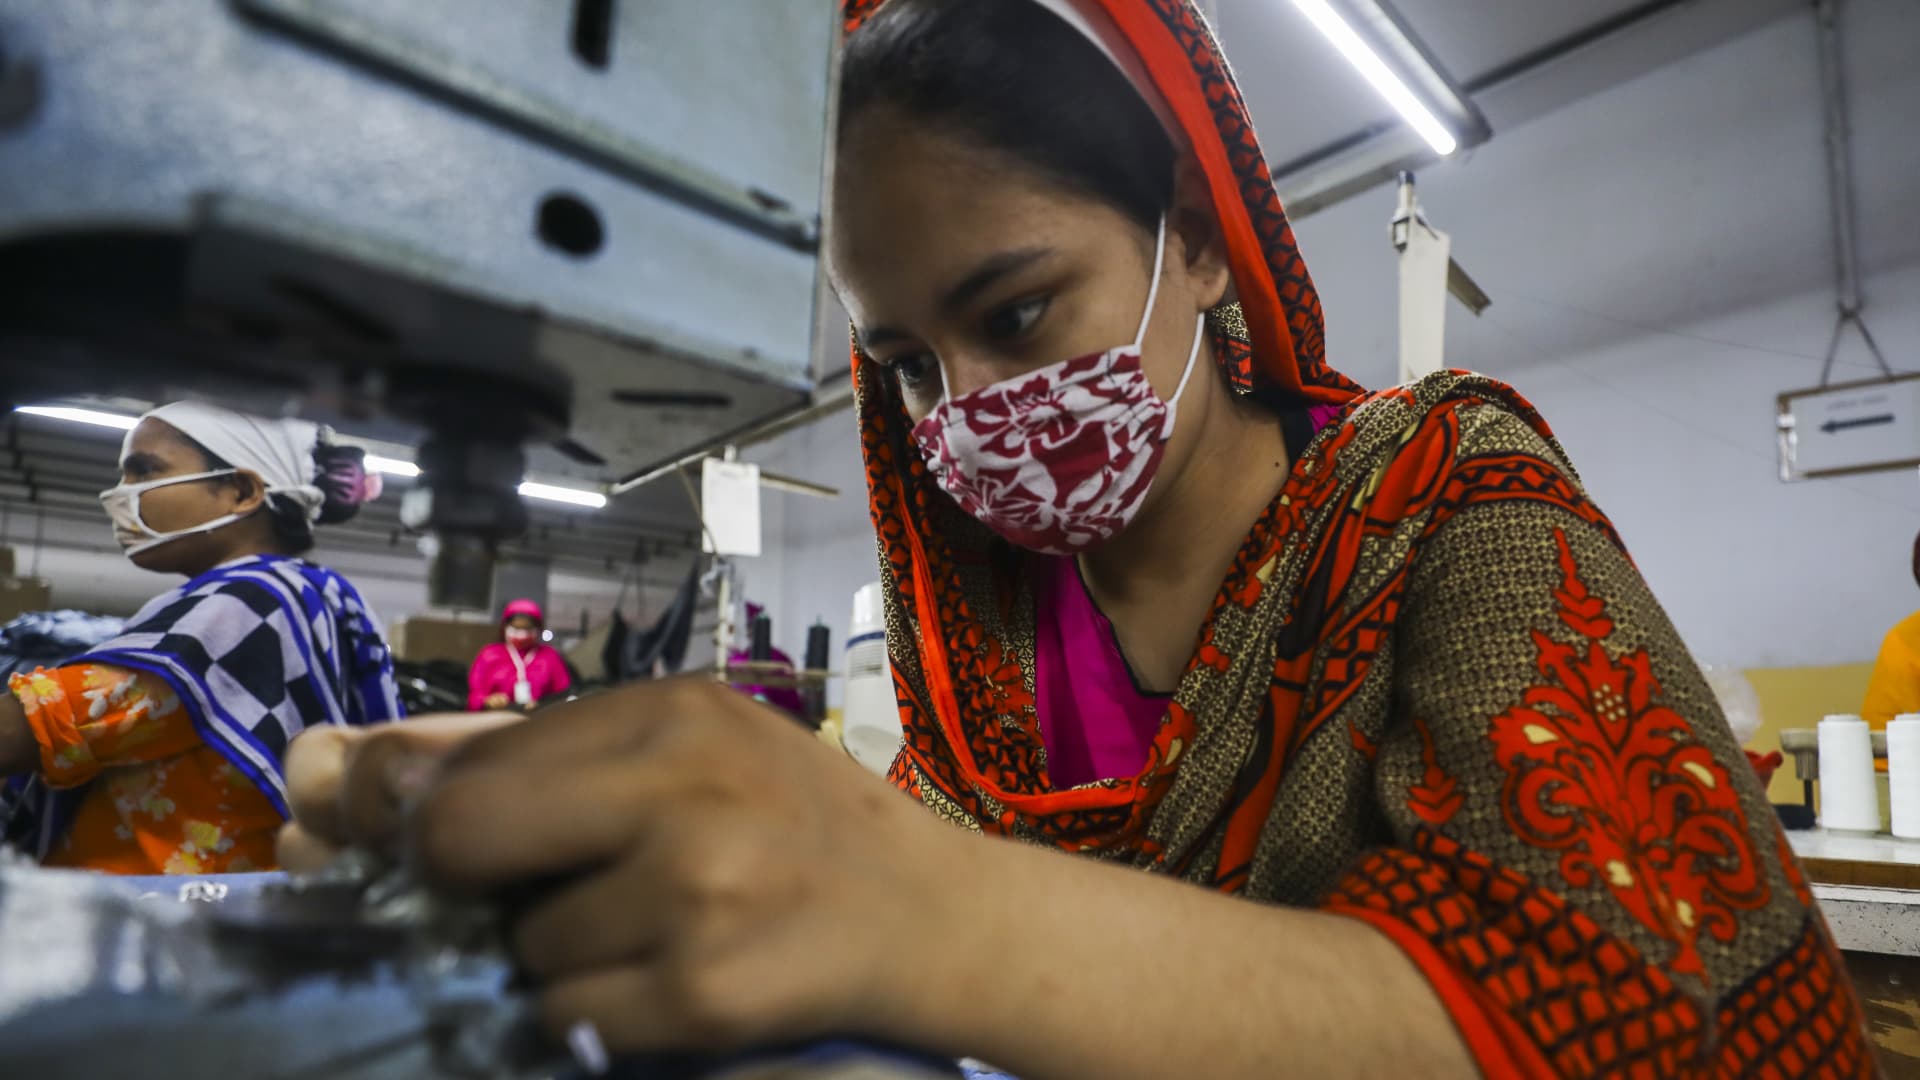 Ready made garments workers works in a garments factory in Dhaka on July 25, 2020.